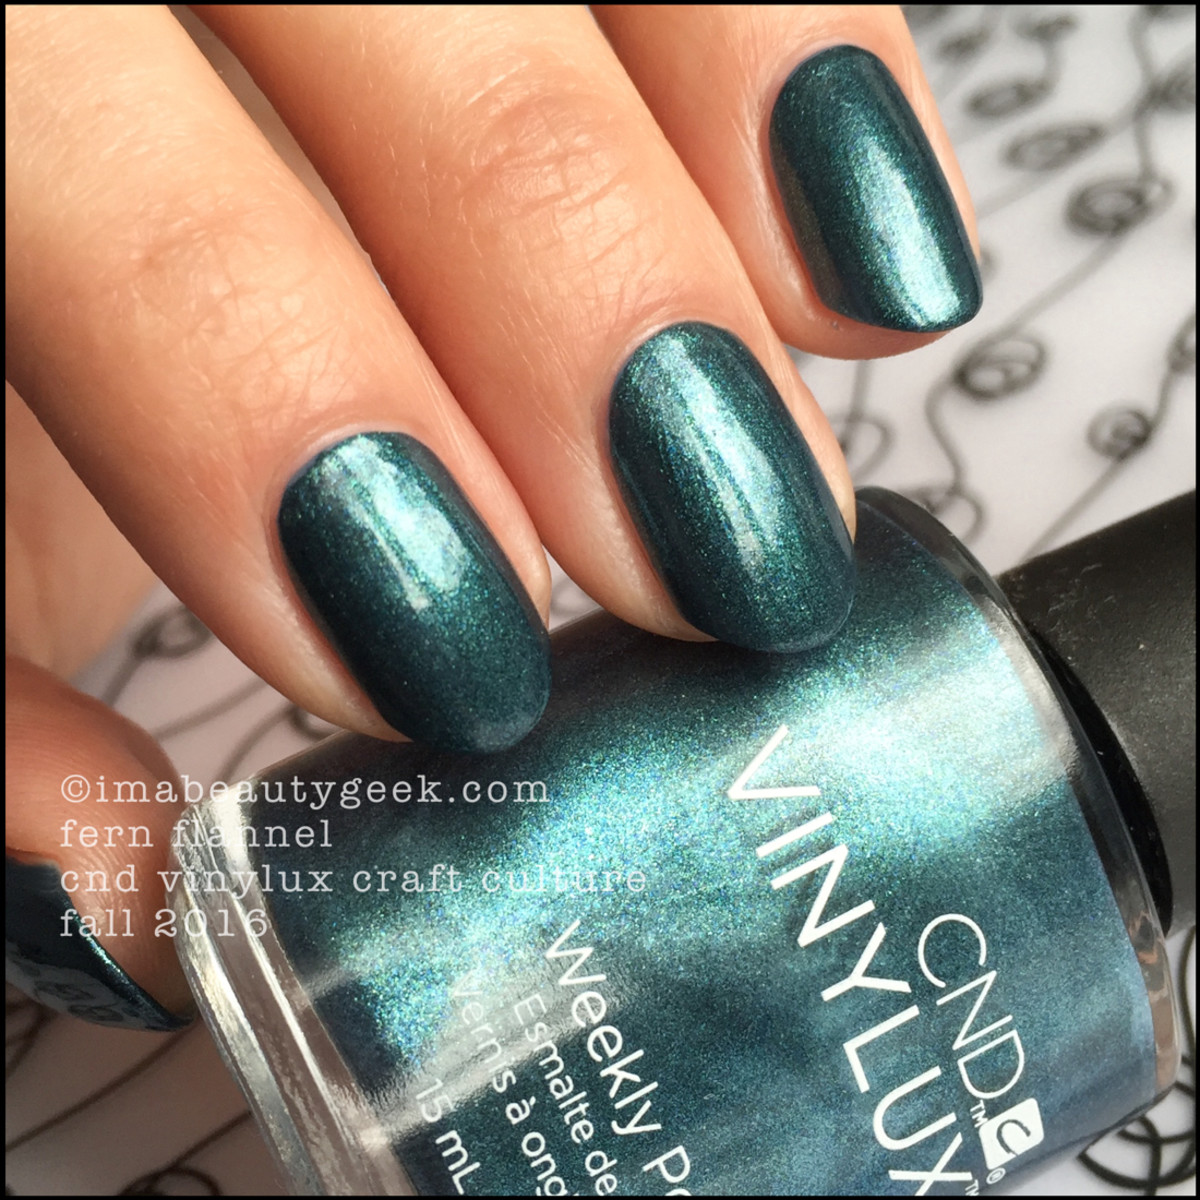 CND Vinylux Fern Flannel_CND Vinylux Craft Culture Collection Fall 2016